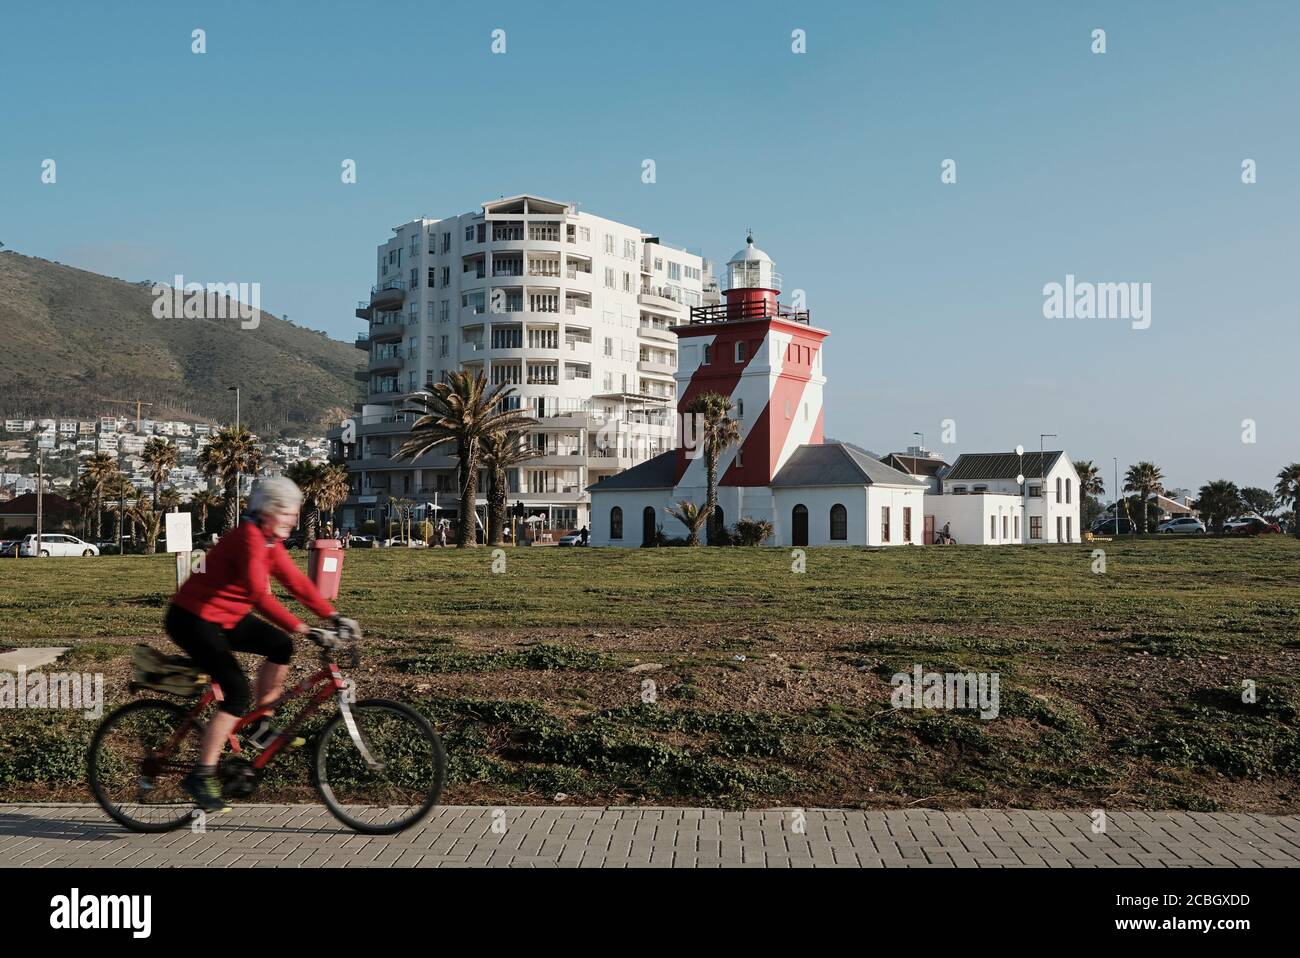 Elderly woman riding her bicycle at the Sea Point Promenade in Cape Town with the Green Point Lighthouse in the background-Motion blur on the cyclist. Stock Photo